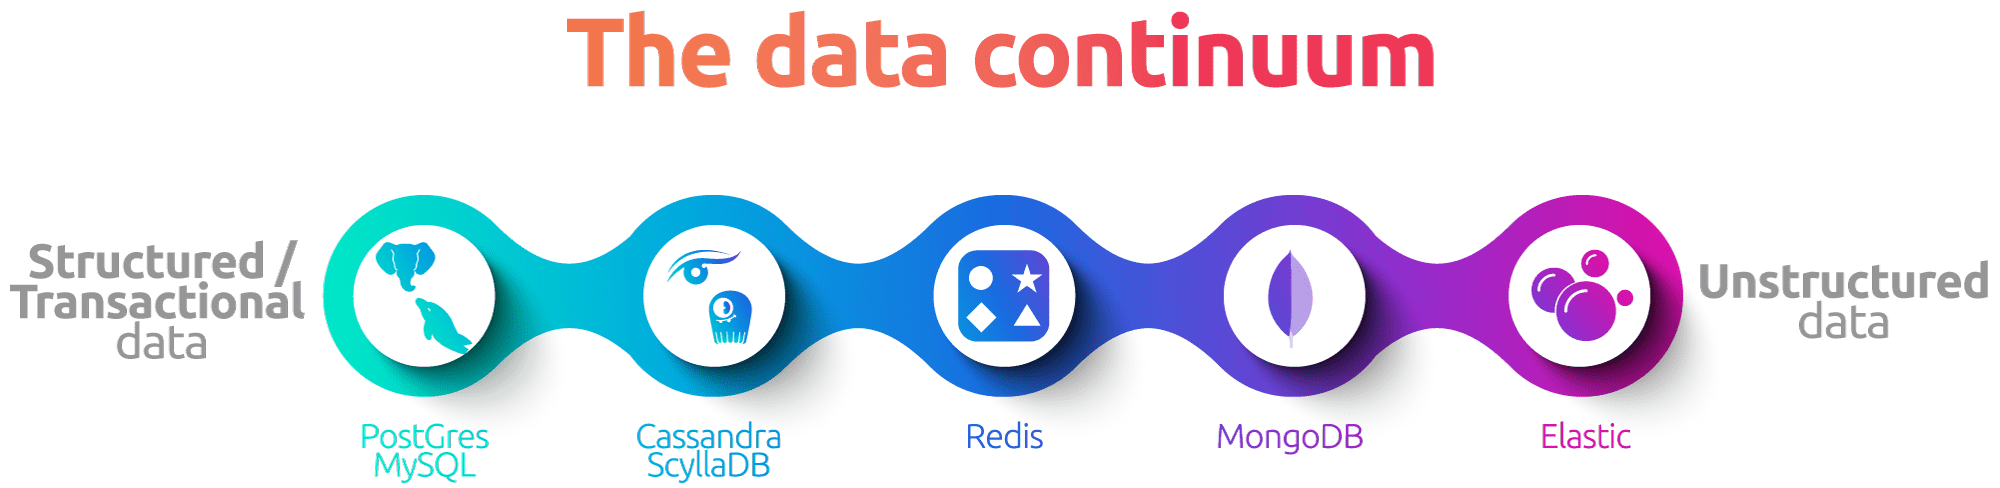 image showing data stores along a data continuum from structured to unstructured data